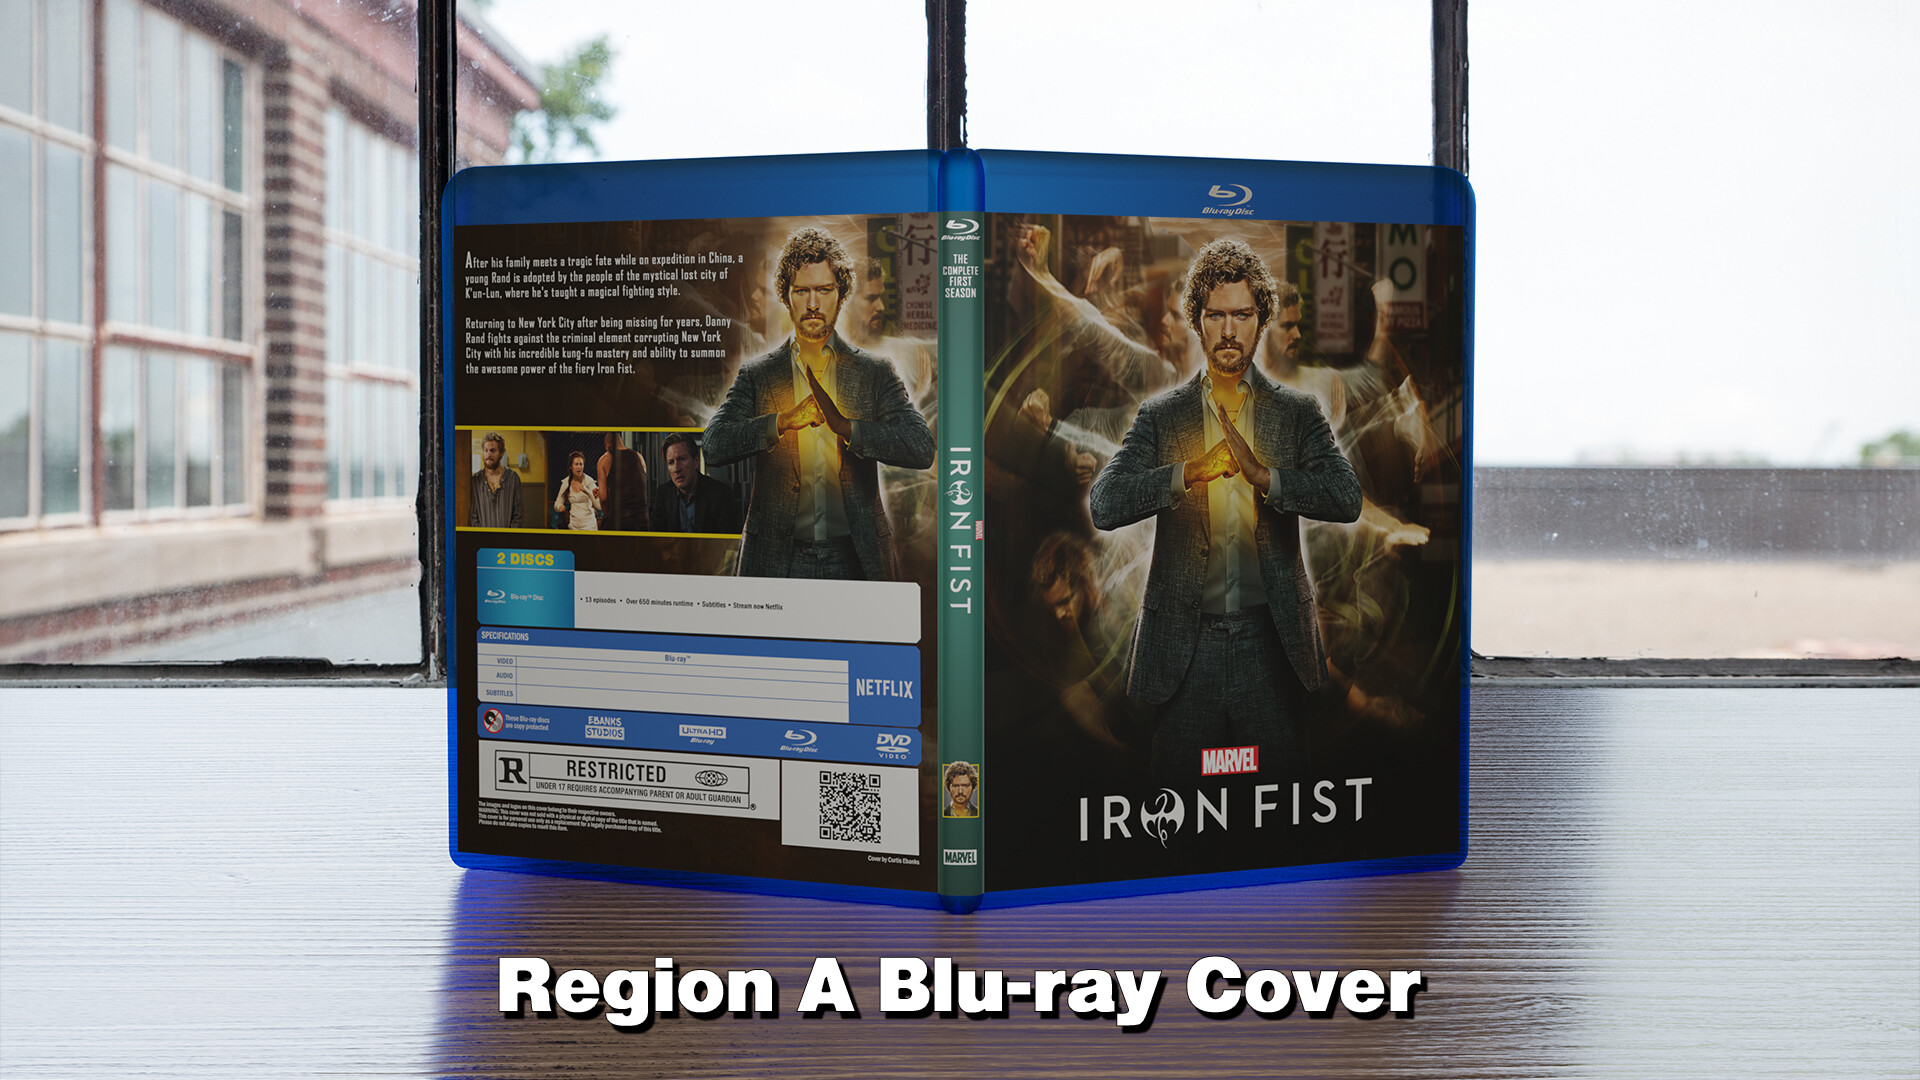 CoverCity - DVD Covers & Labels - Iron Fist - Season 1